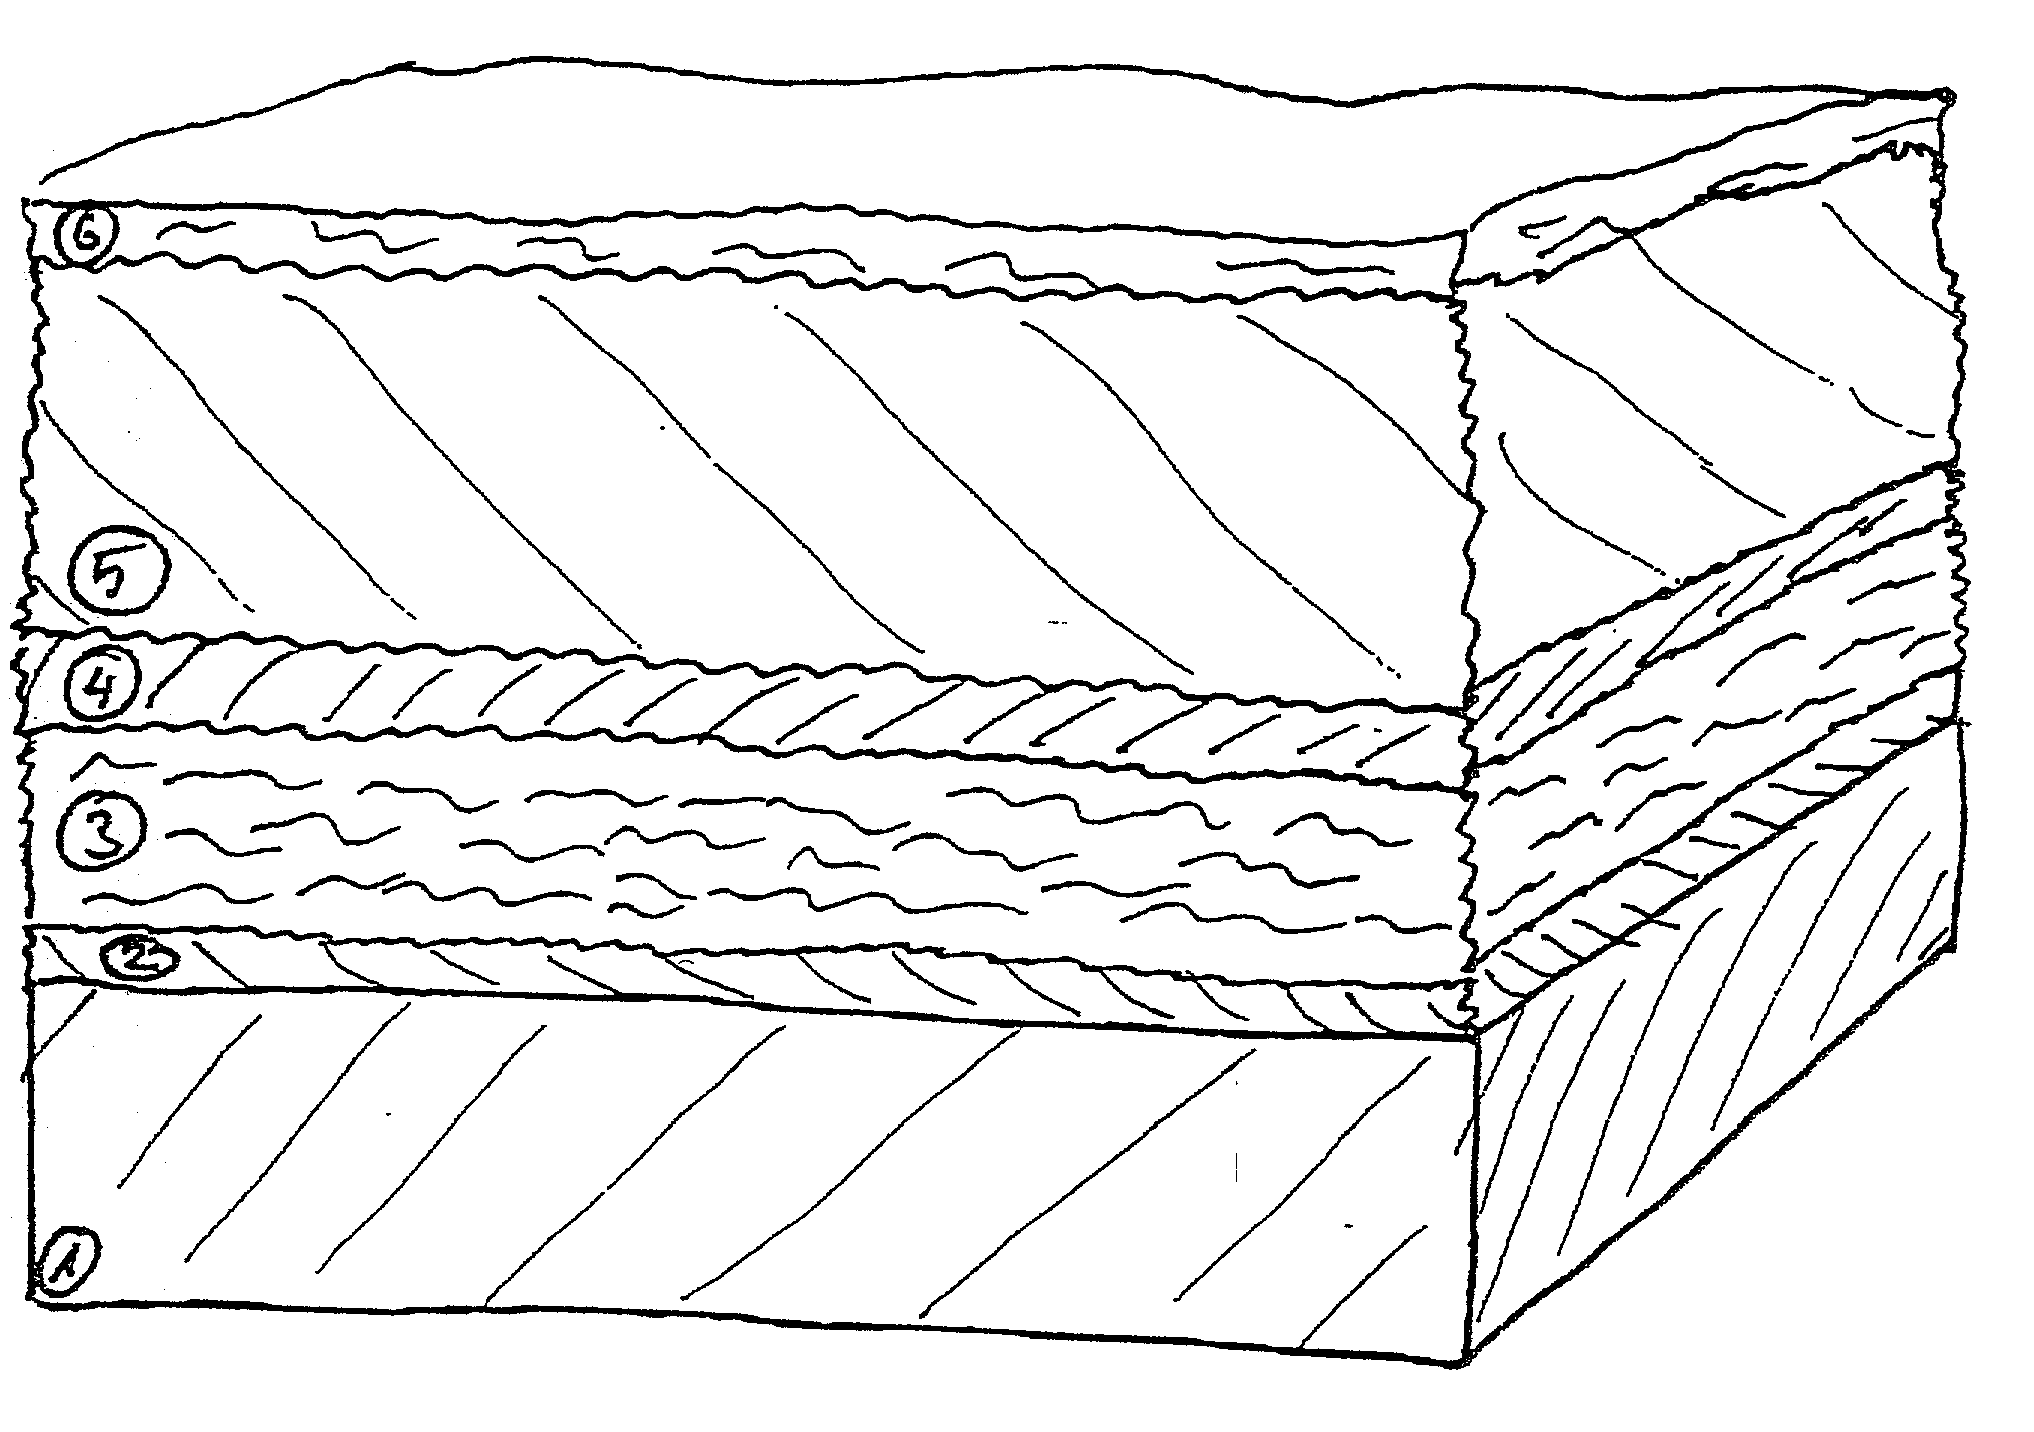 Process for applying a heat shielding coating system on a metallic substrate